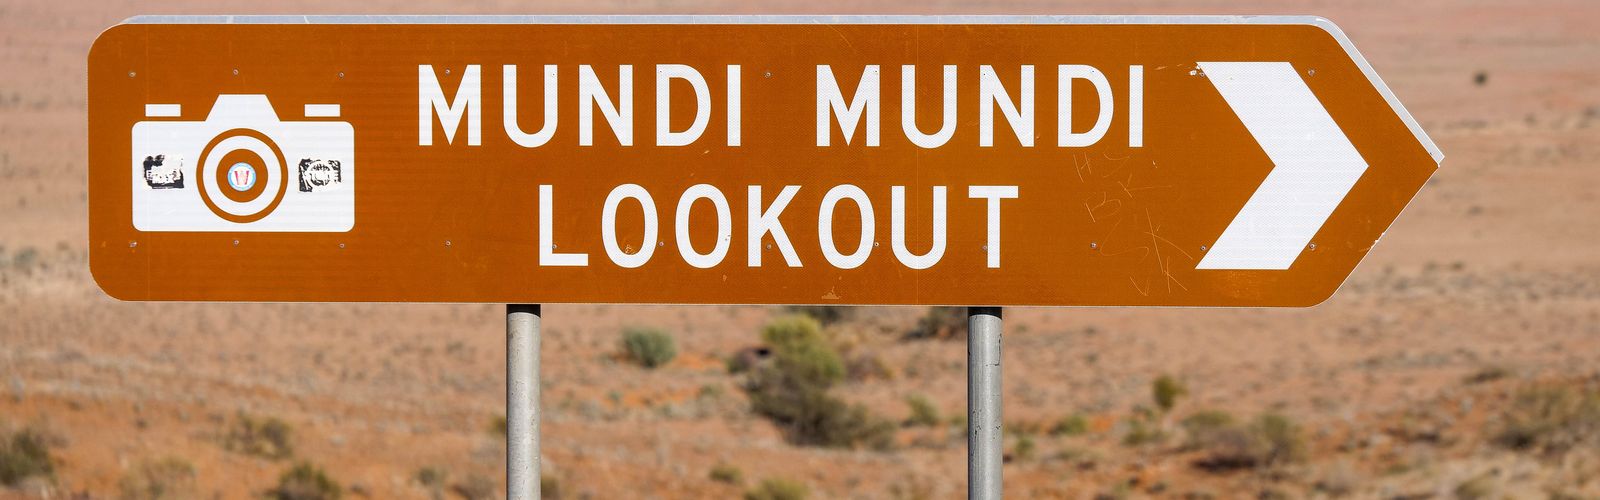 The Mundi Mundi Bash will be held in April and August